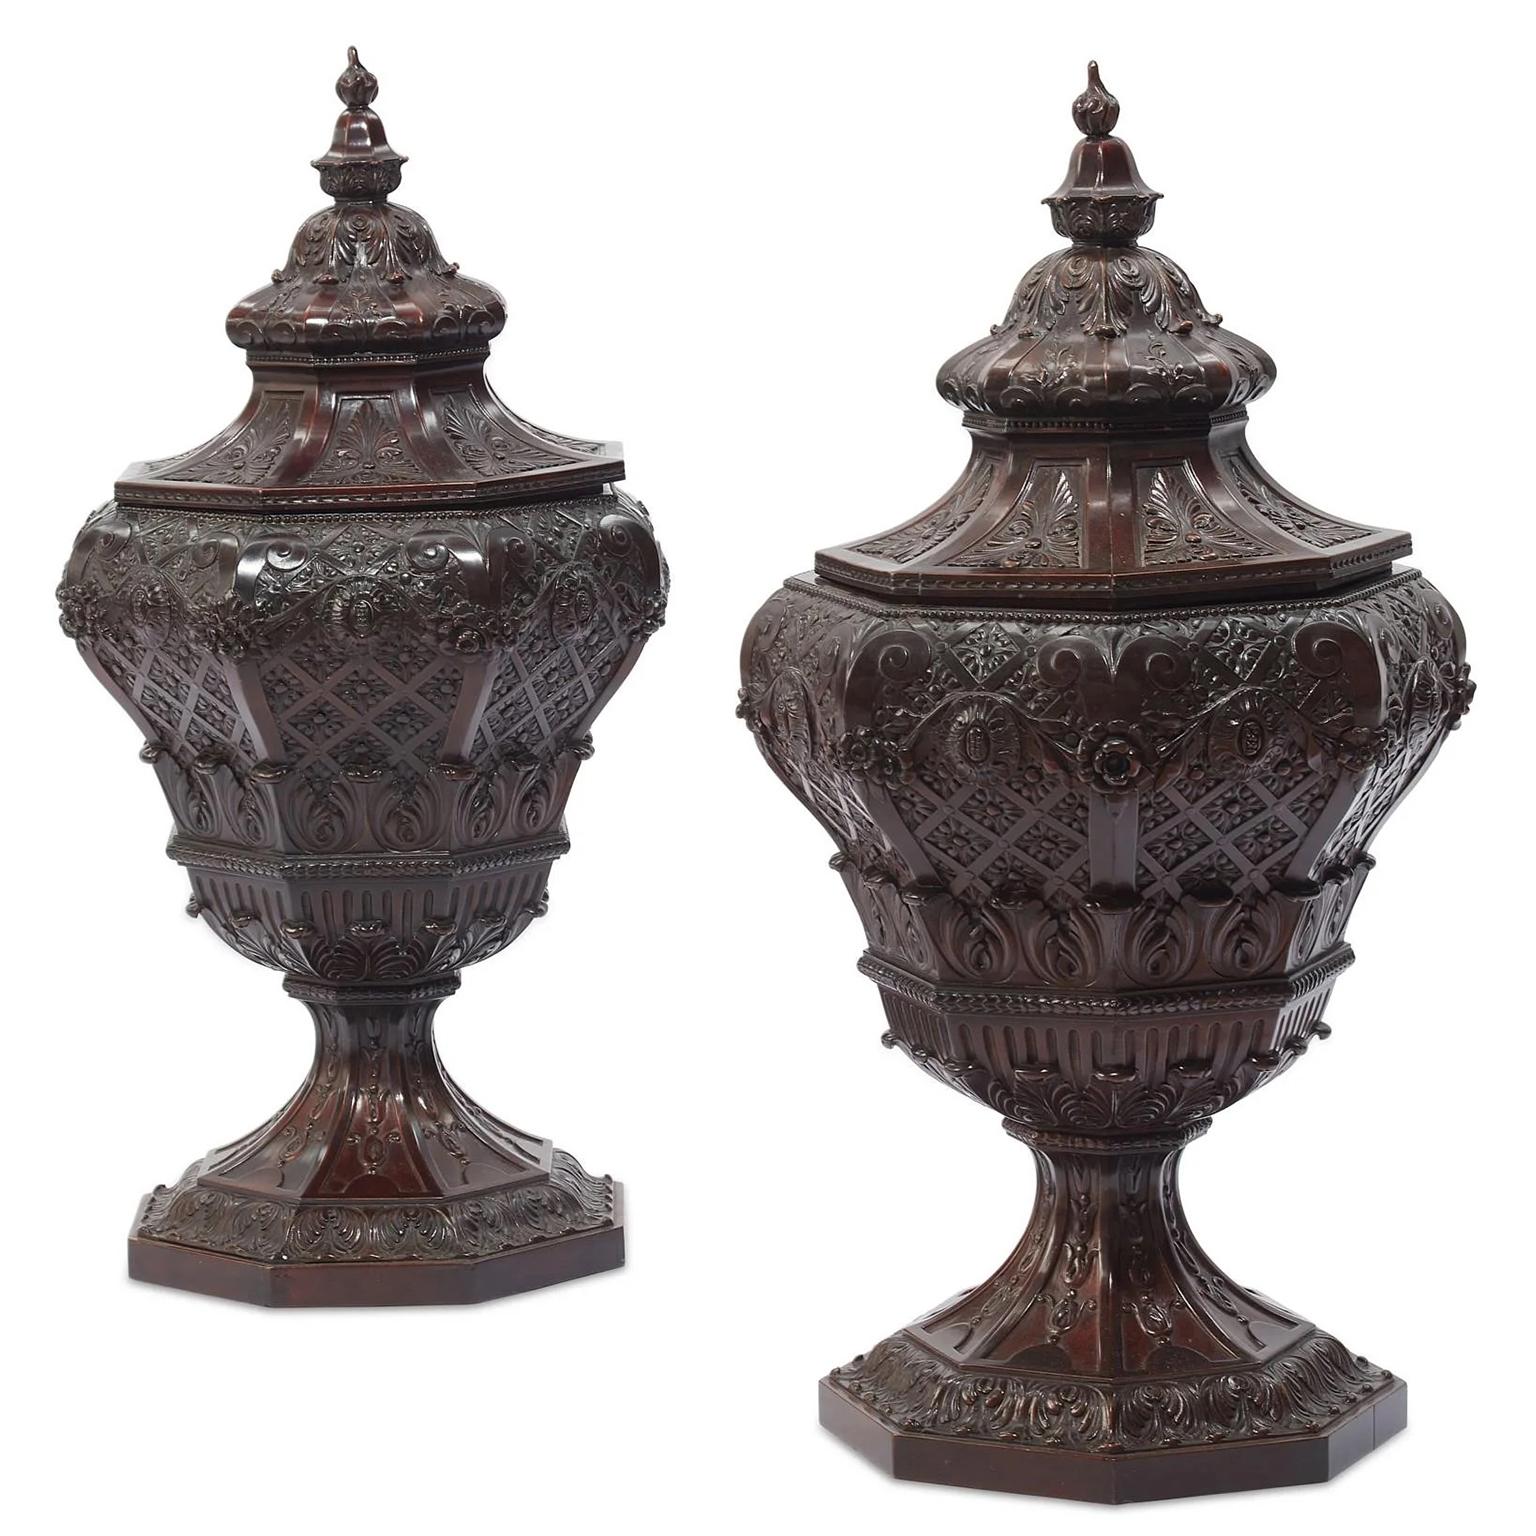 A very fine and rare pair of 19th century Regency style carved mahogany Cellarette urns or wine-drink coolers. The intricately carved ovoid shaped urn, decorated with acanthus leaves, wreaths and lilies, the removable lid top with a carved acorn